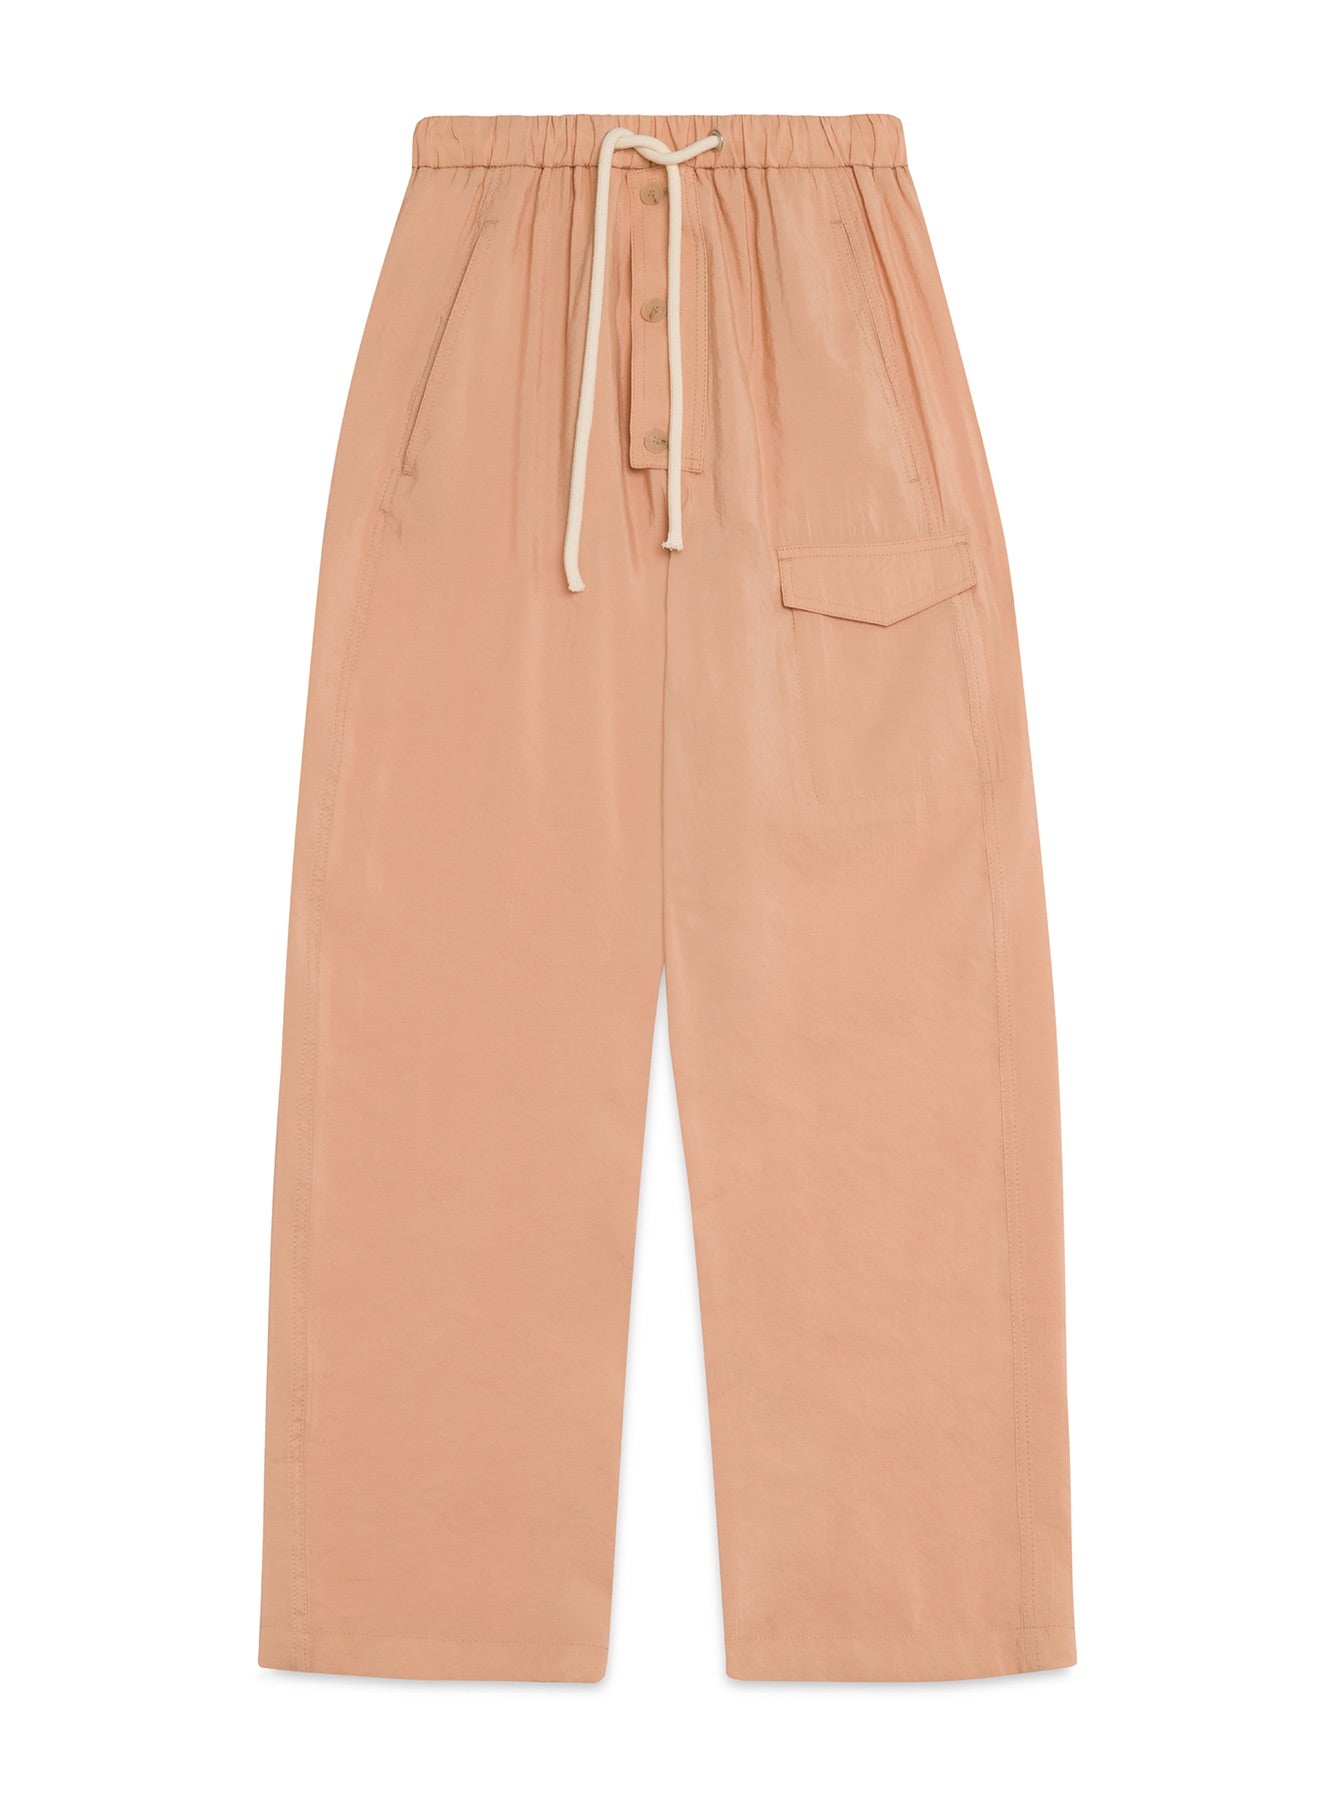 Soft Nude Trousers